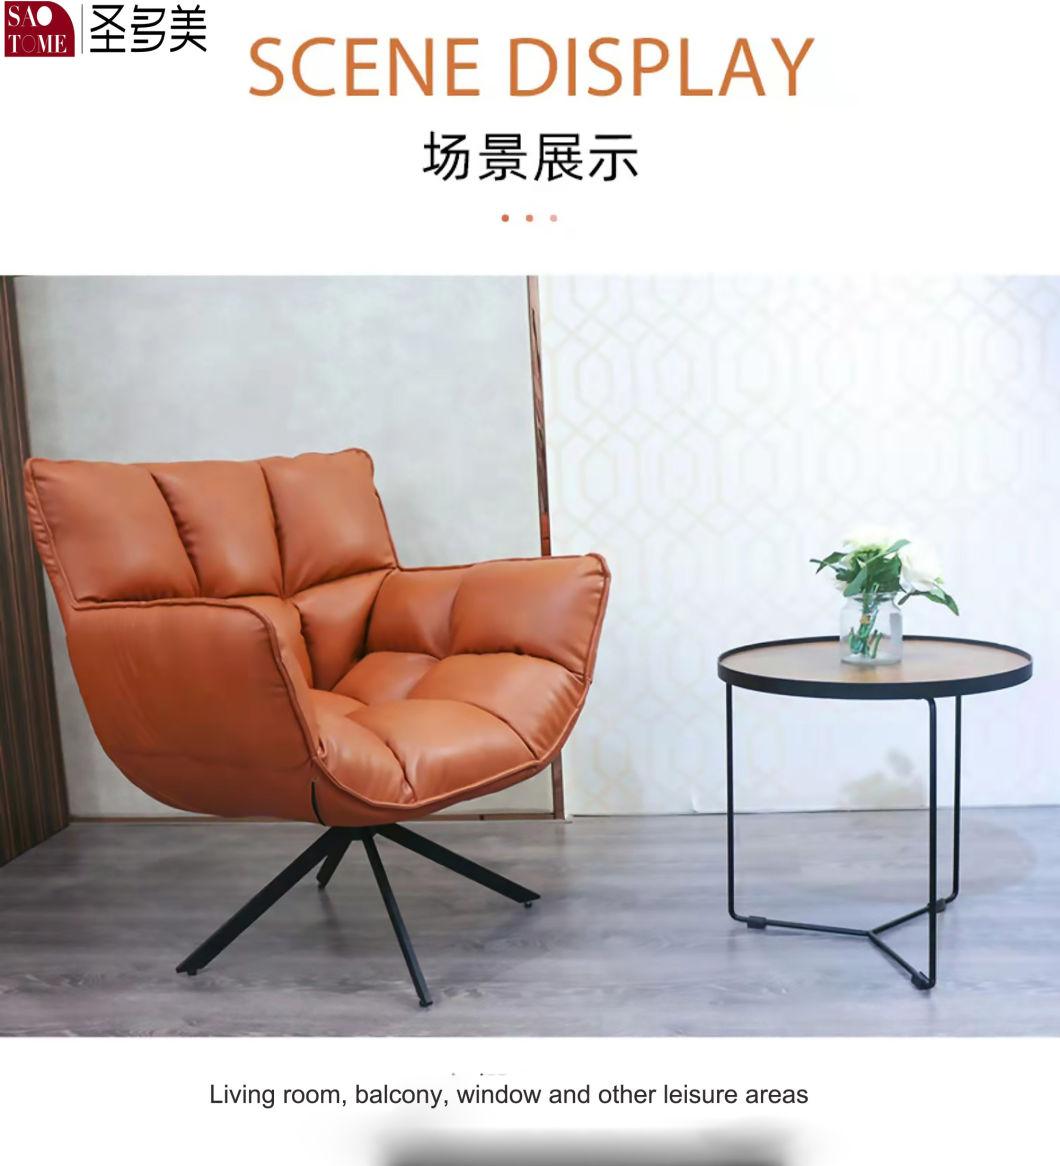 Comfortable Sofa Chair or Leisure Chair for Home